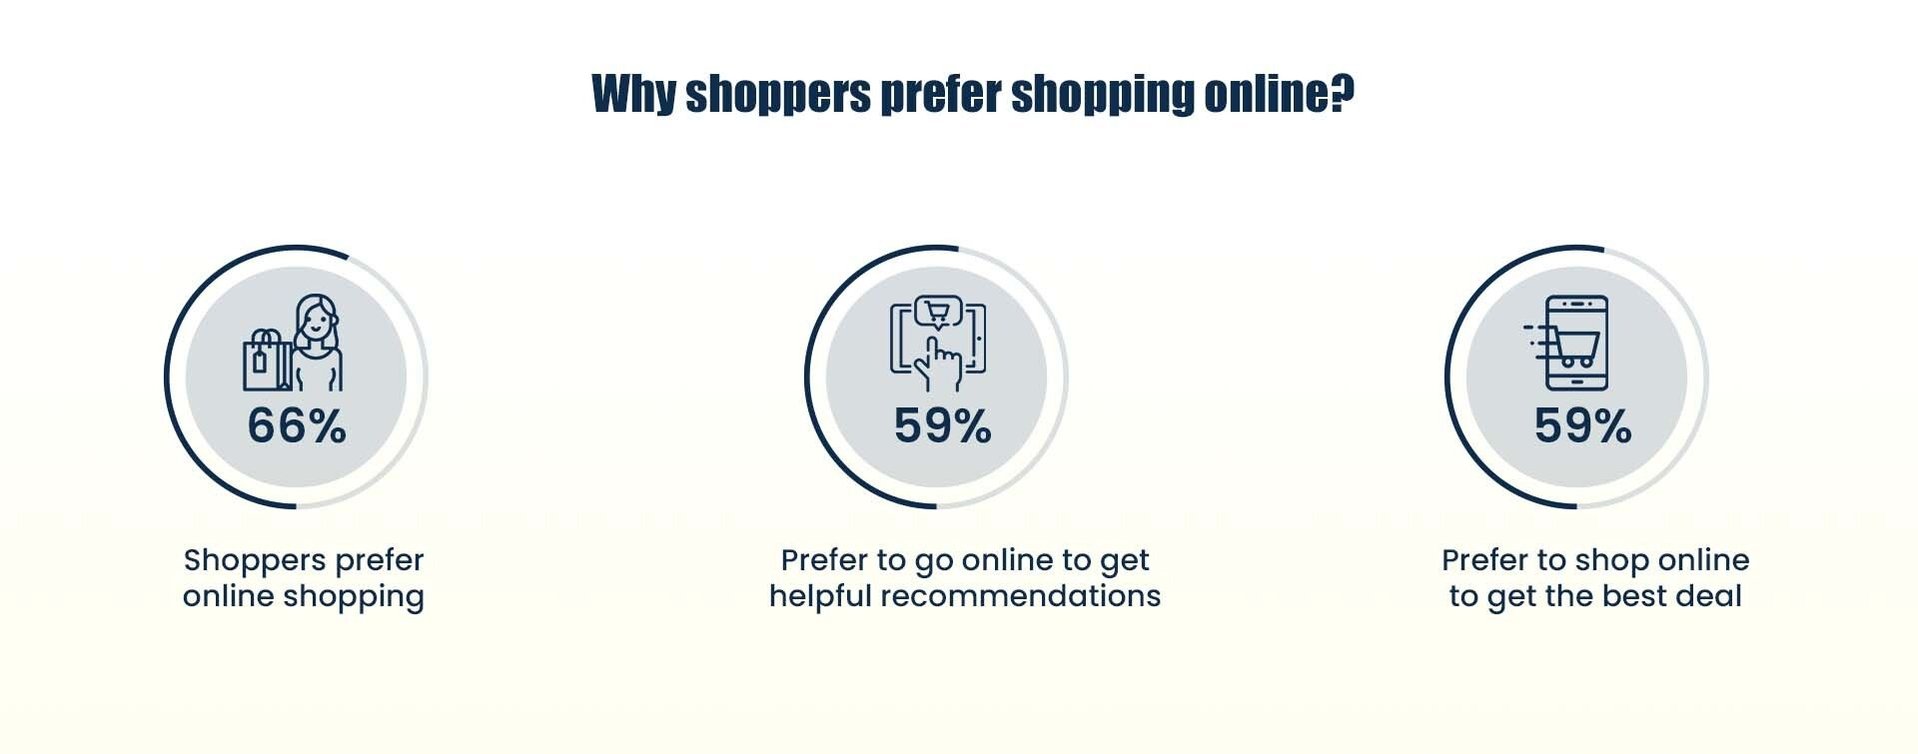 Why shoppers prefer shopping online?